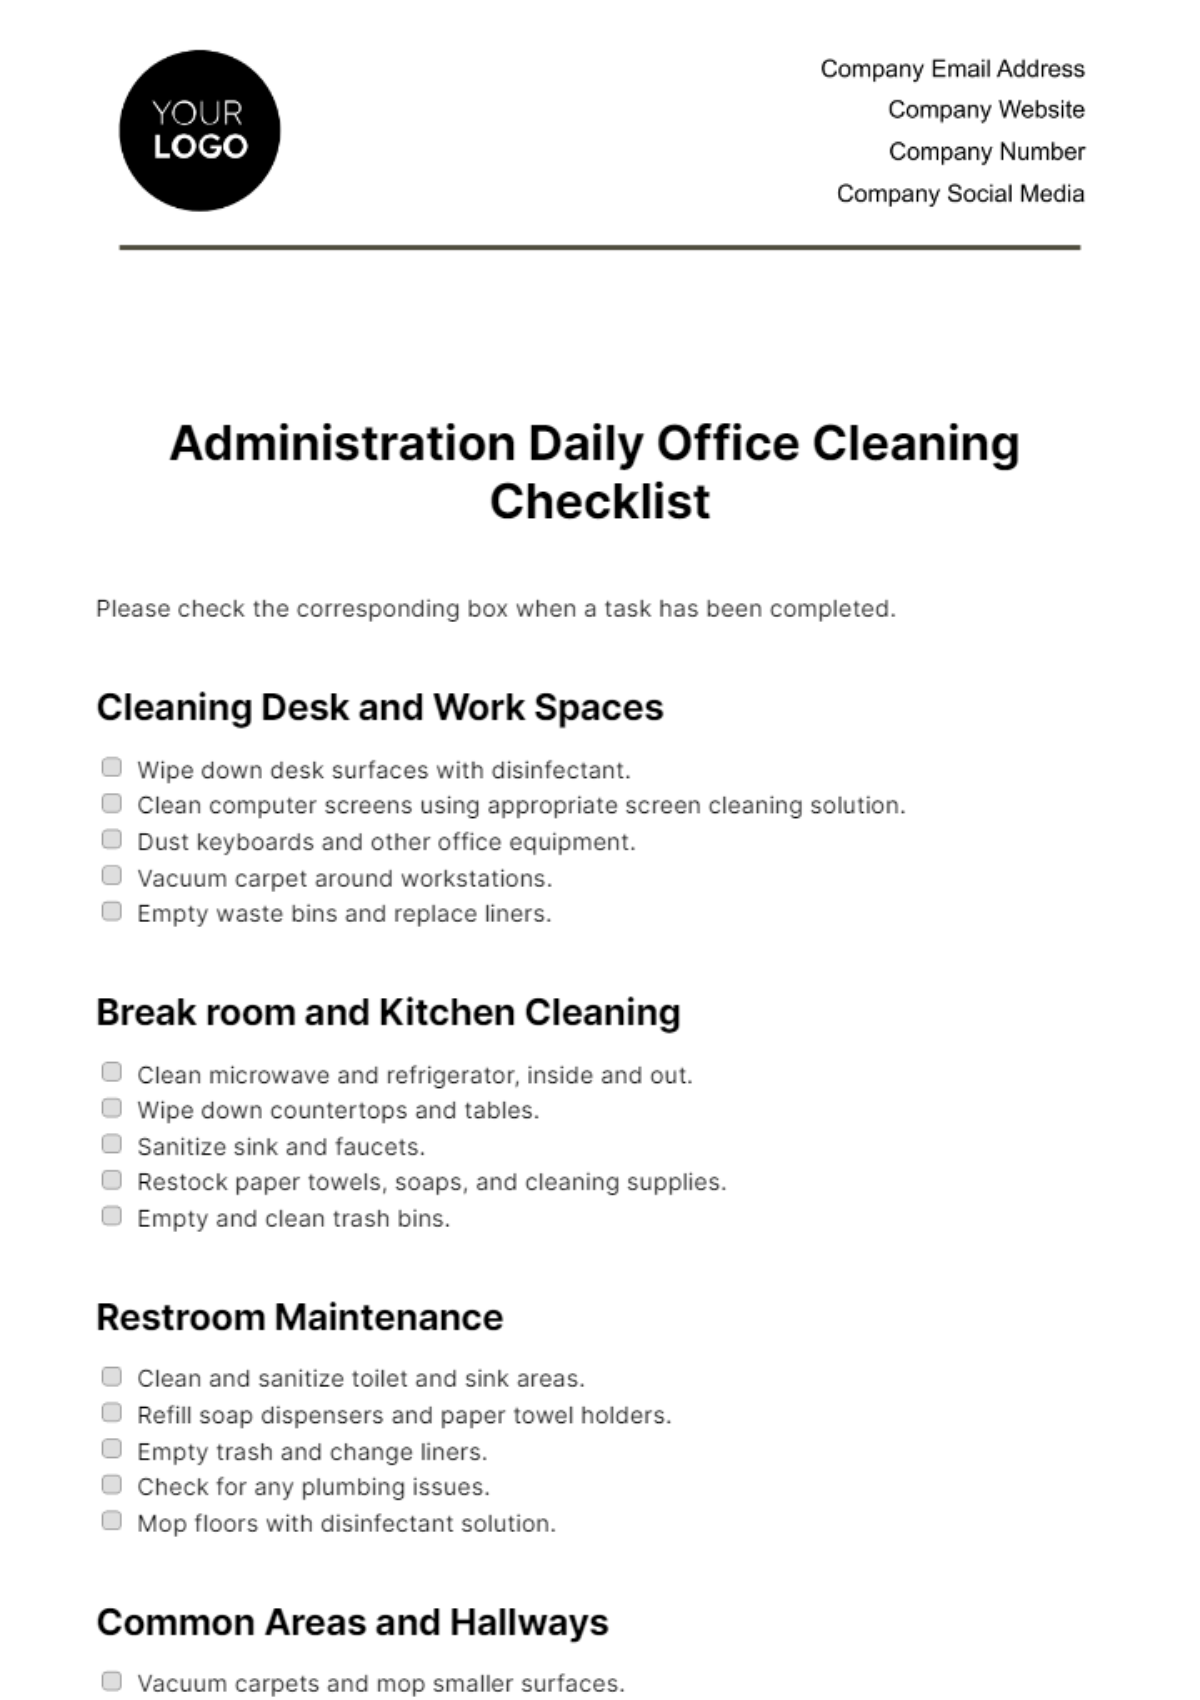 Administration Daily Office Cleaning Checklist Template